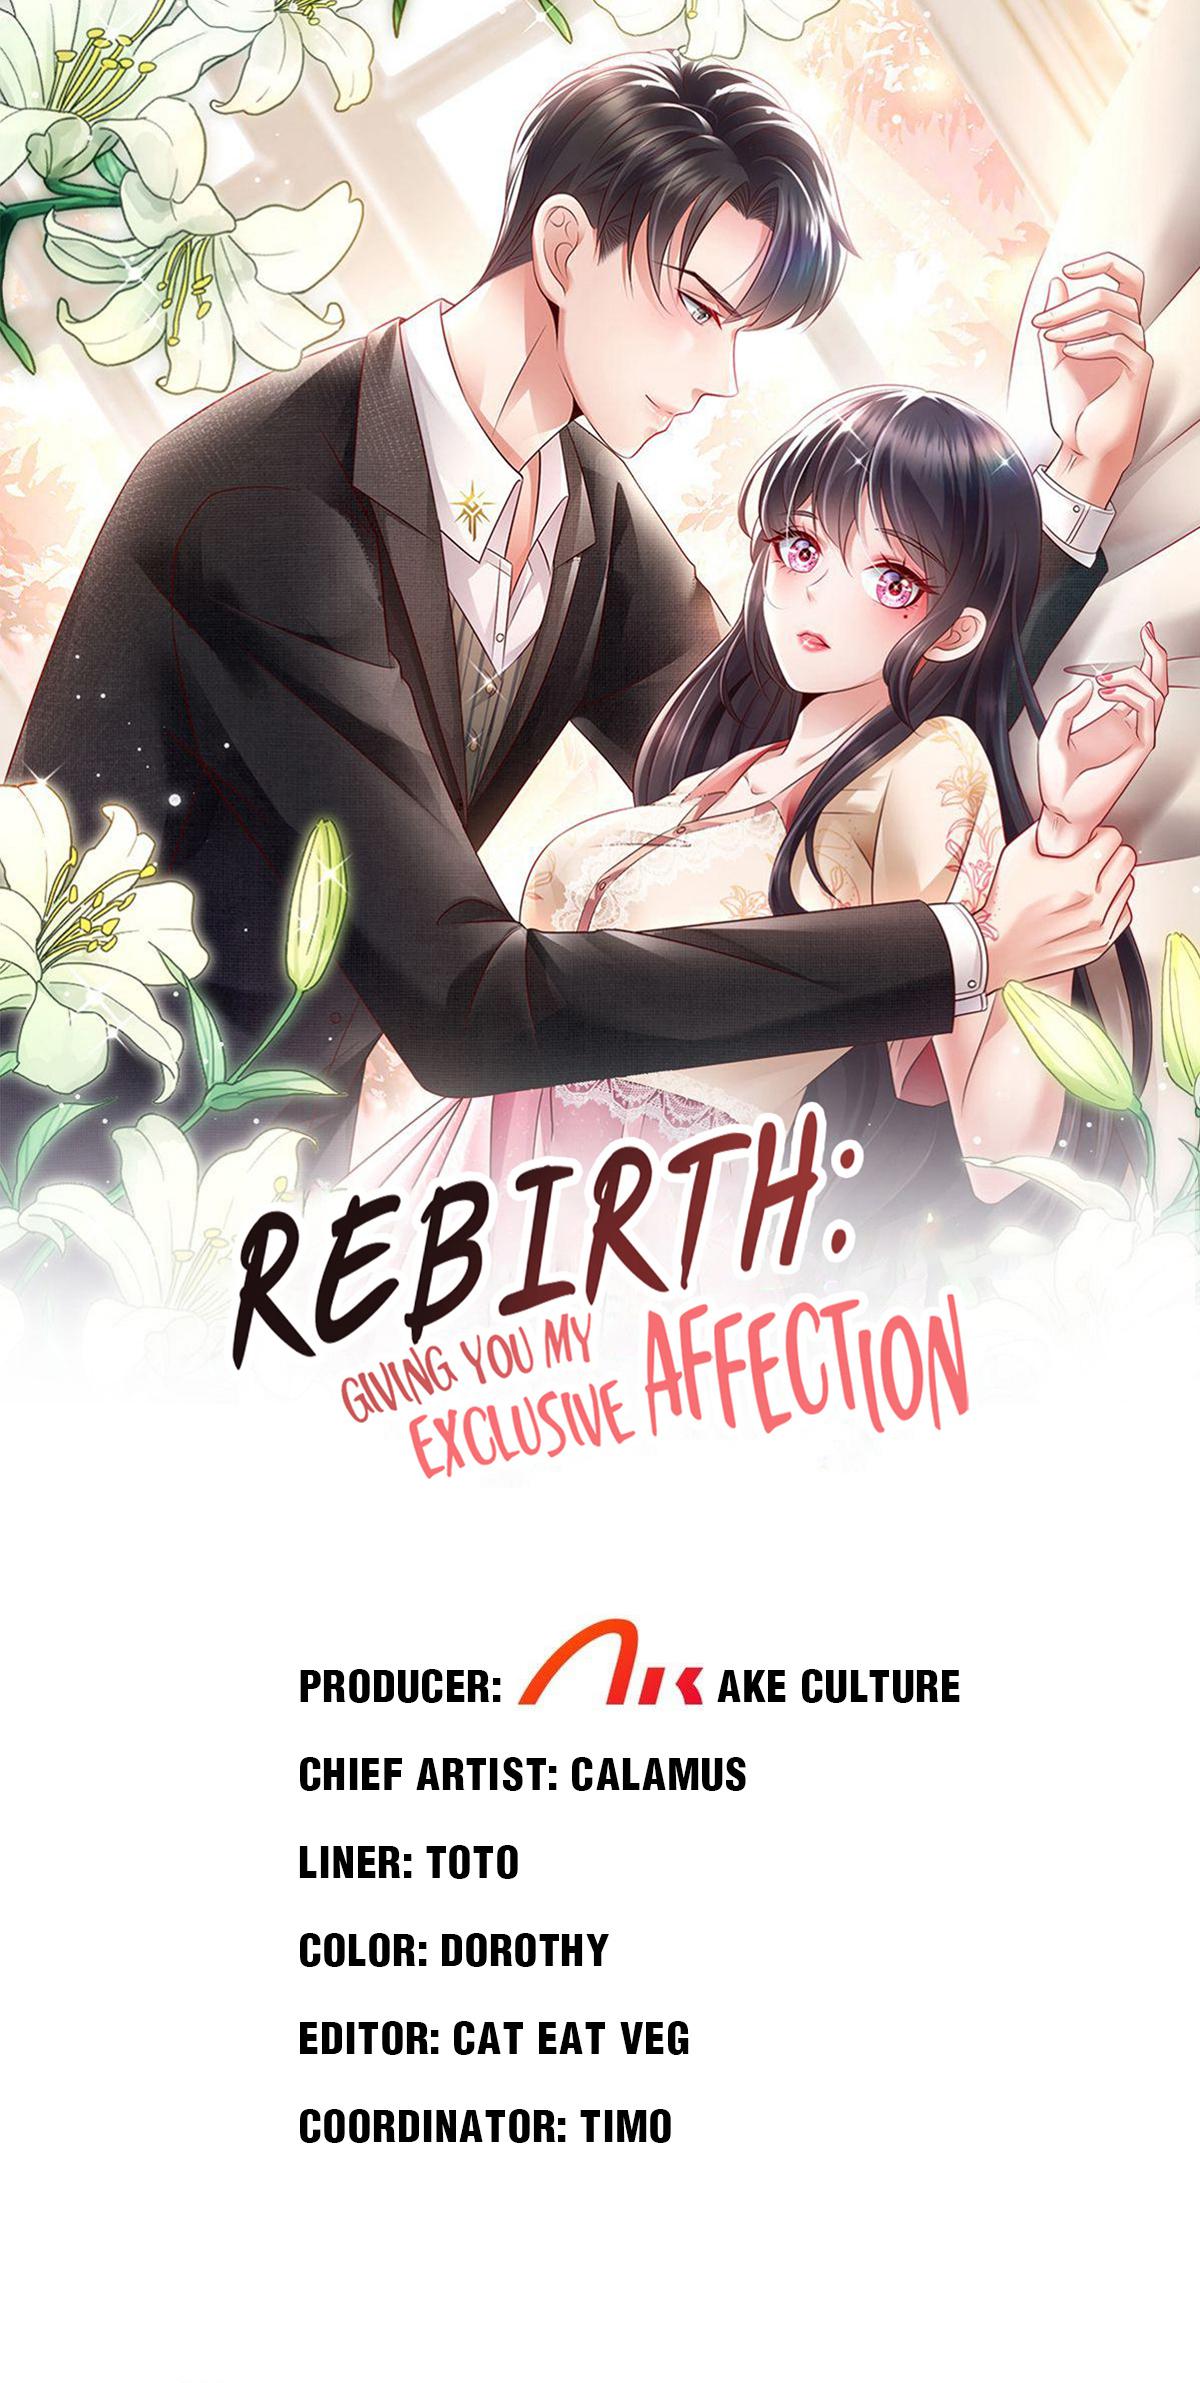 Rebirth: Giving You My Exclusive Affection 136